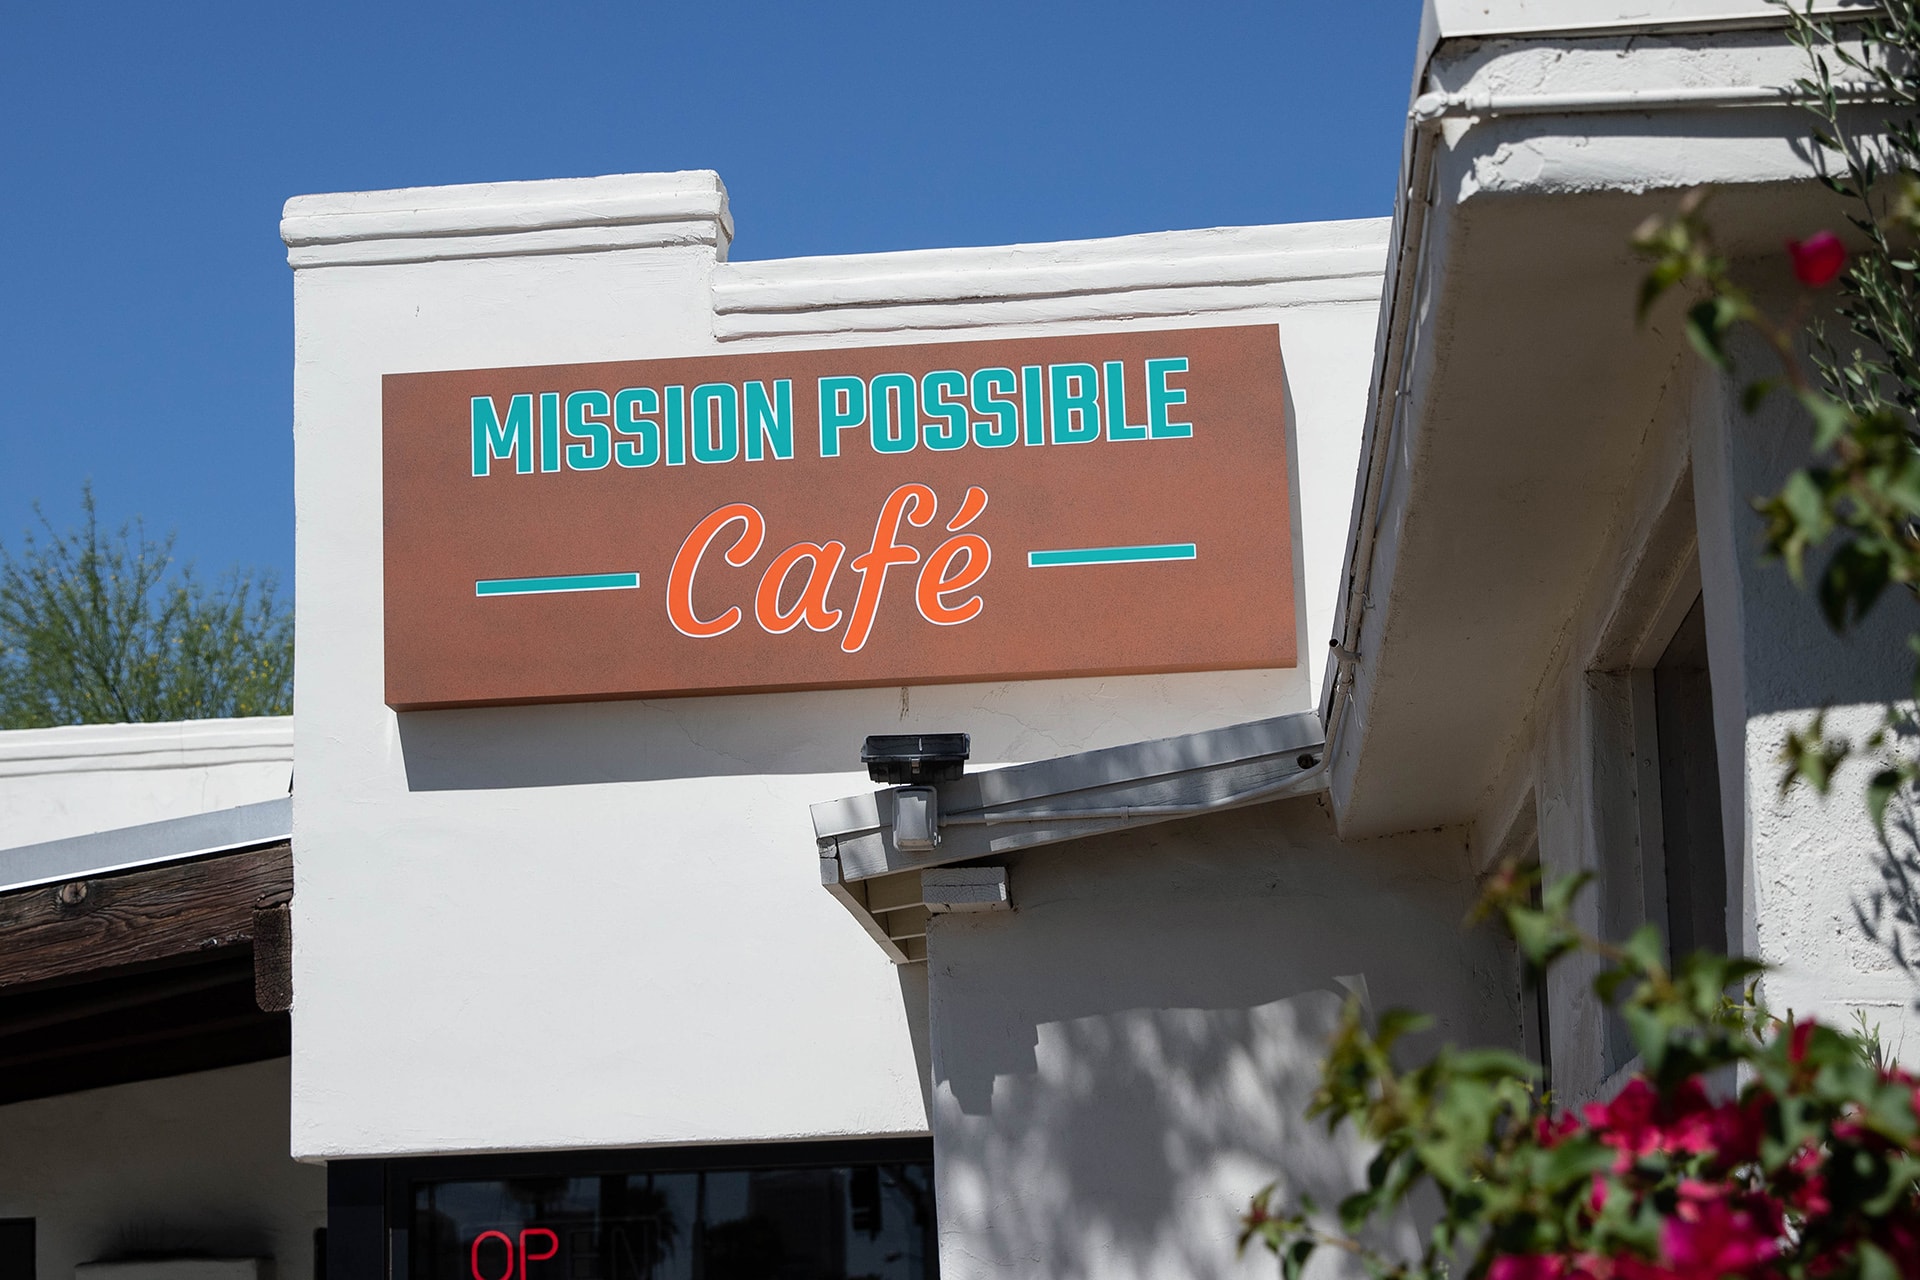 Mission possible cafe sign